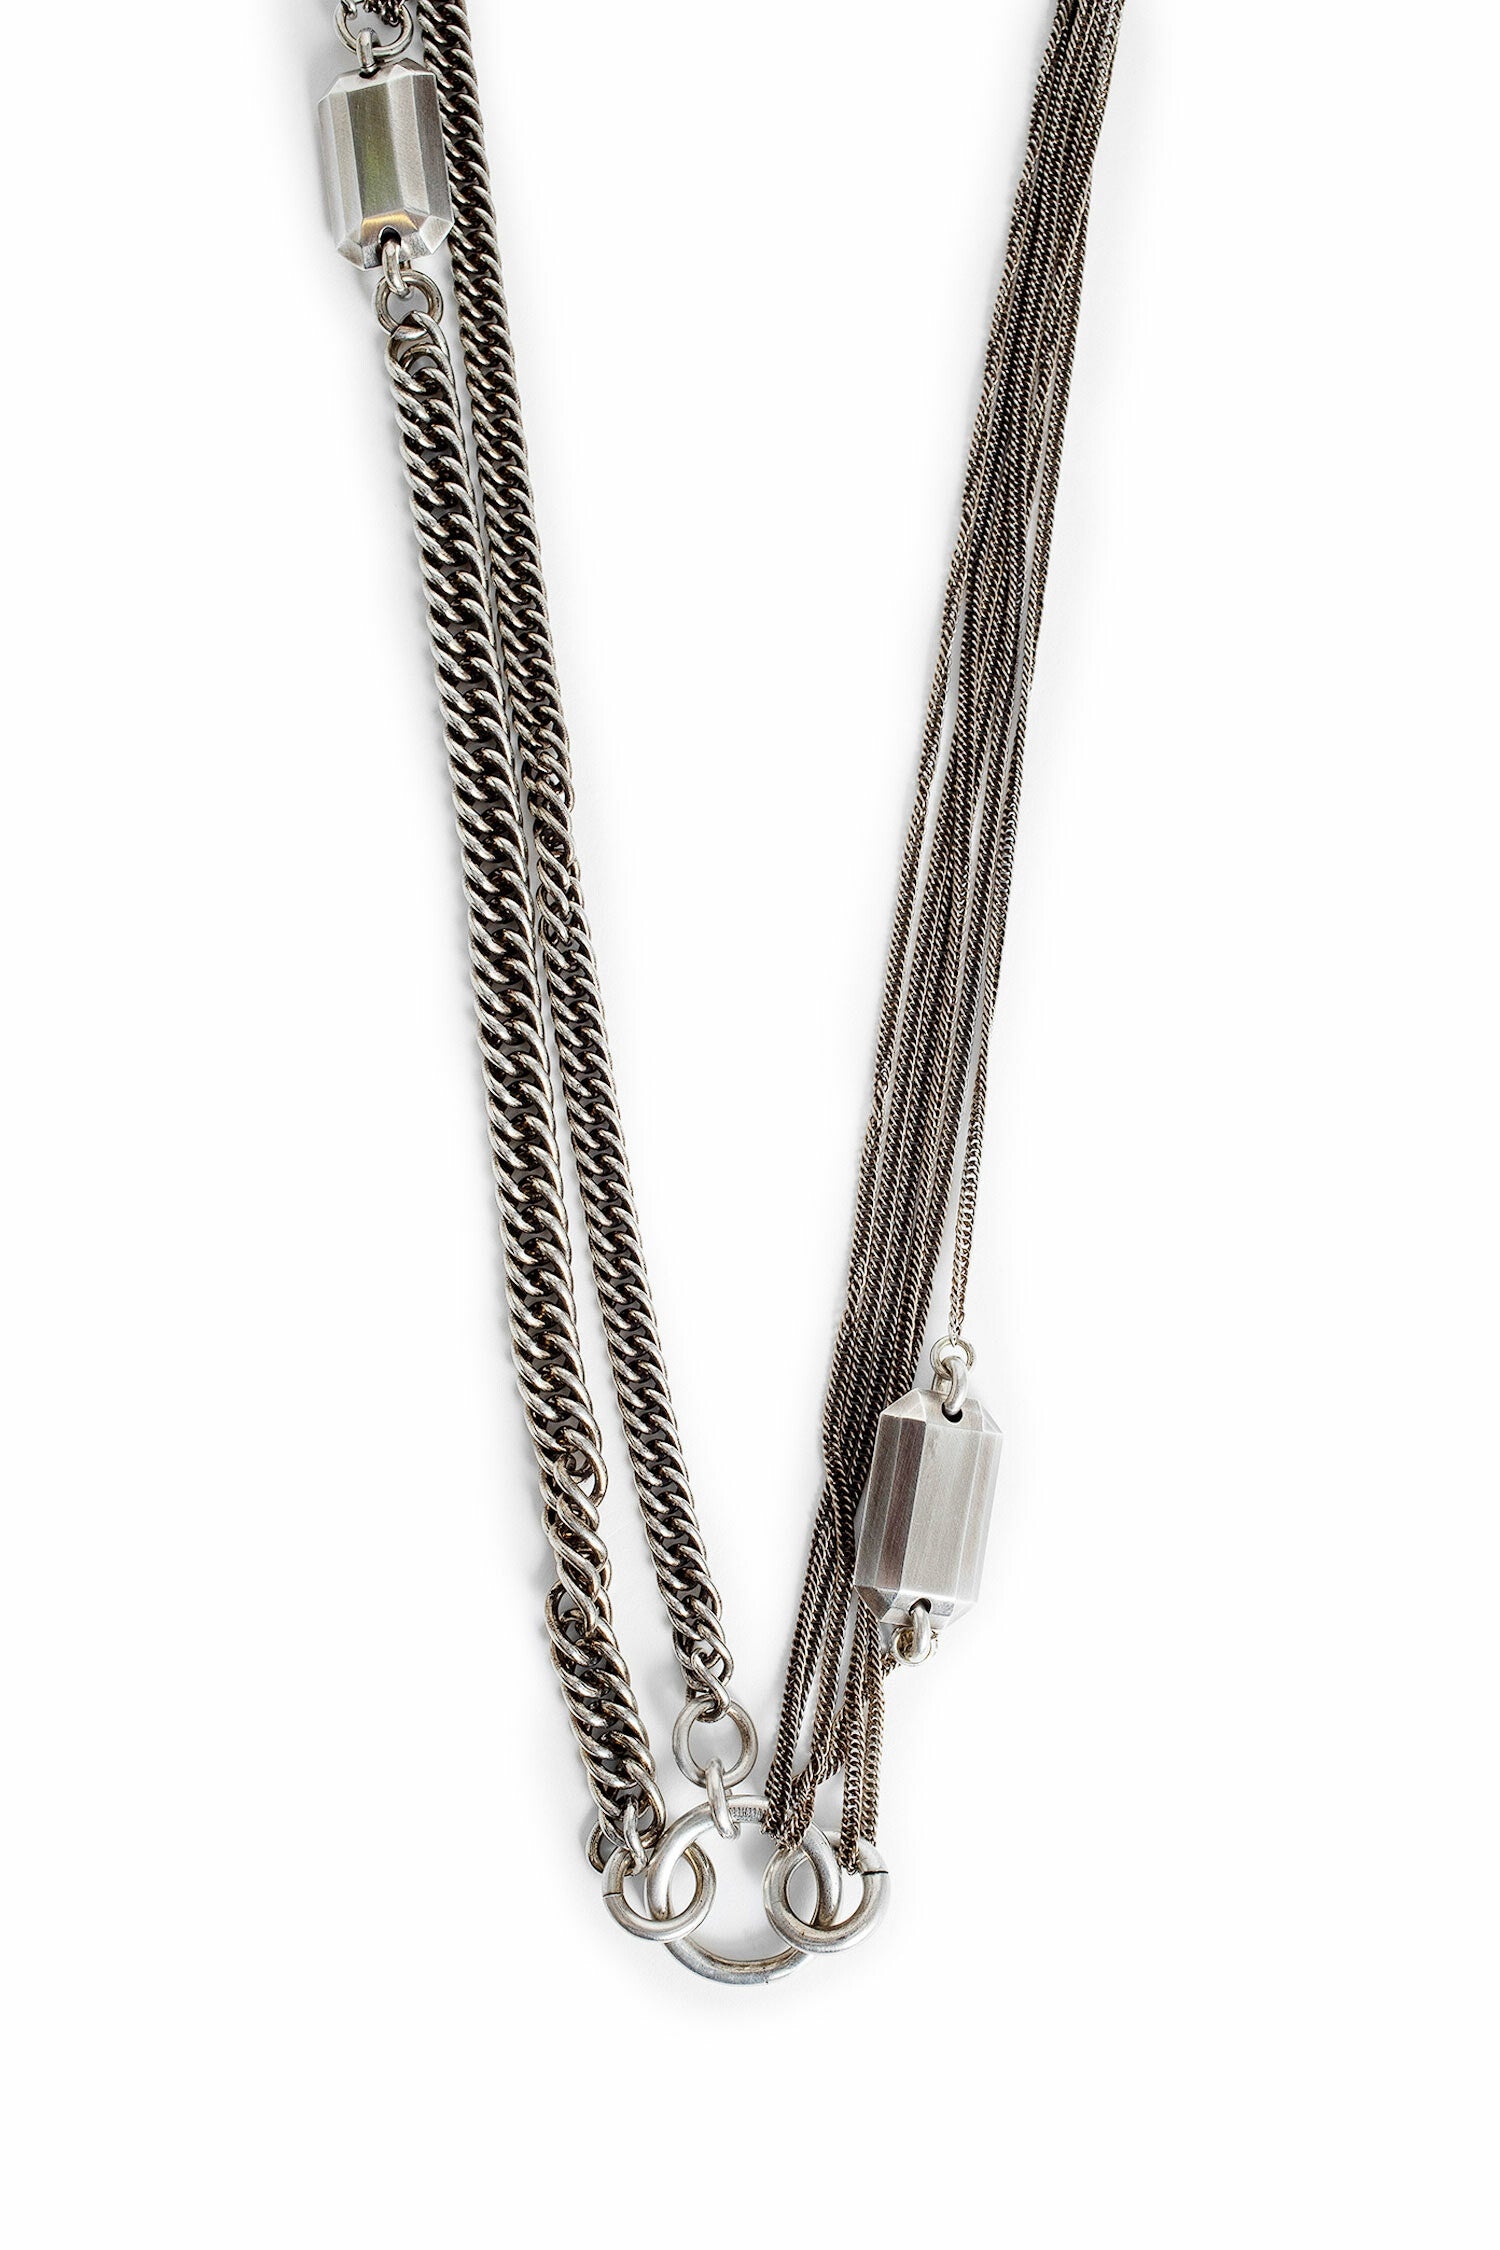 ANN DEMEULEMEESTER WOMAN SILVER NECKLACES - 3